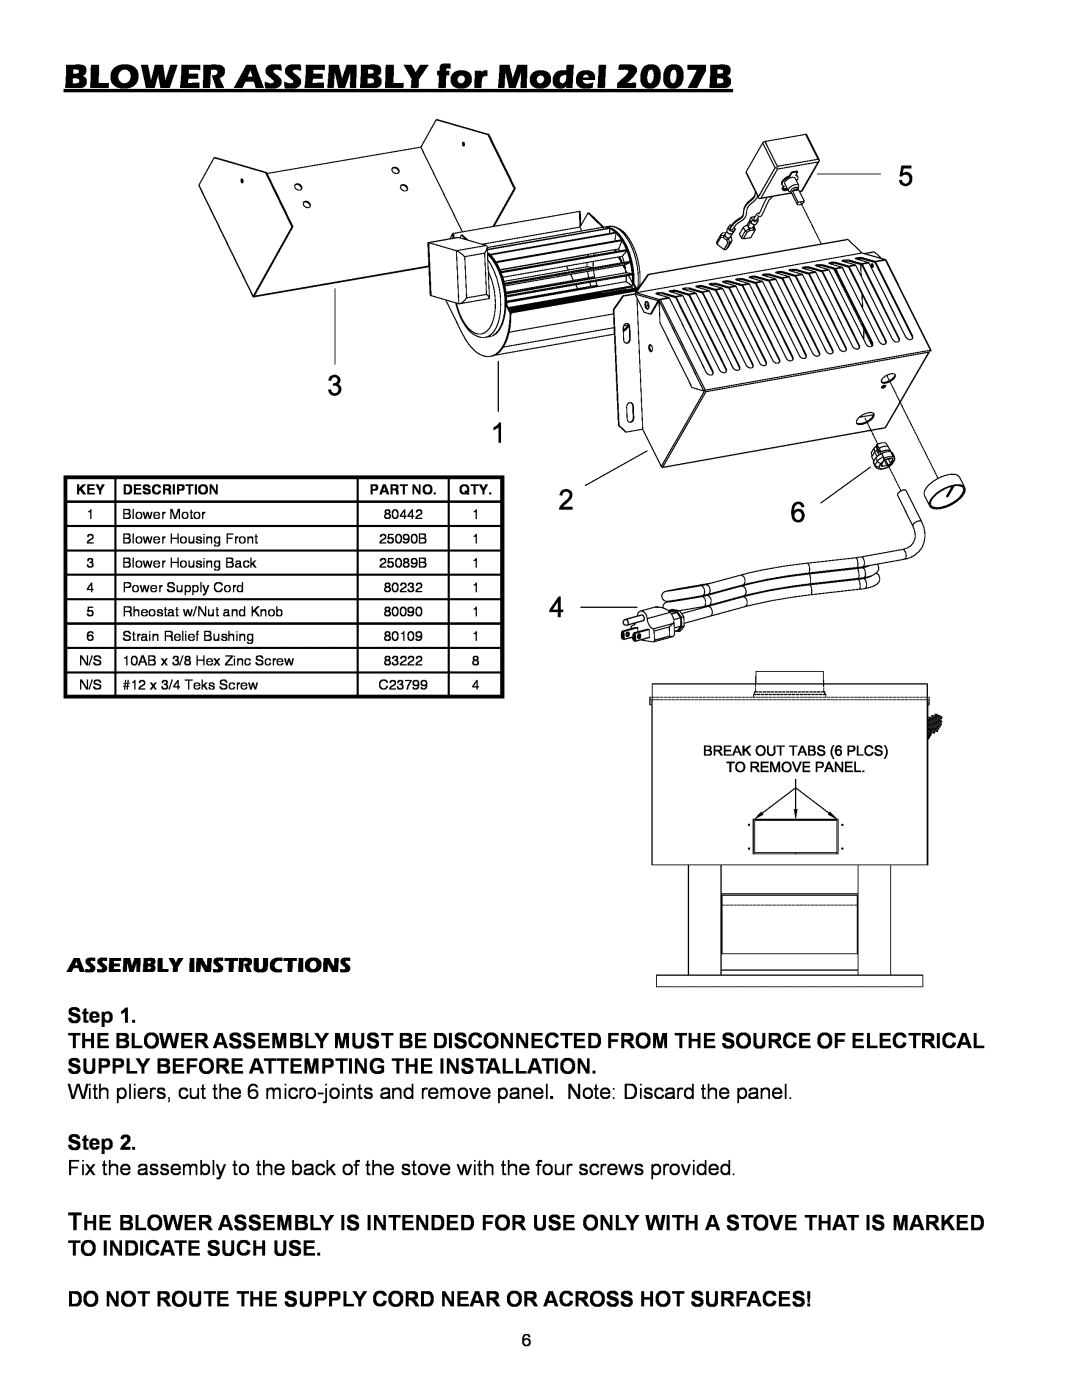 United States Stove owner manual BLOWER ASSEMBLY for Model 2007B, Assembly Instructions 